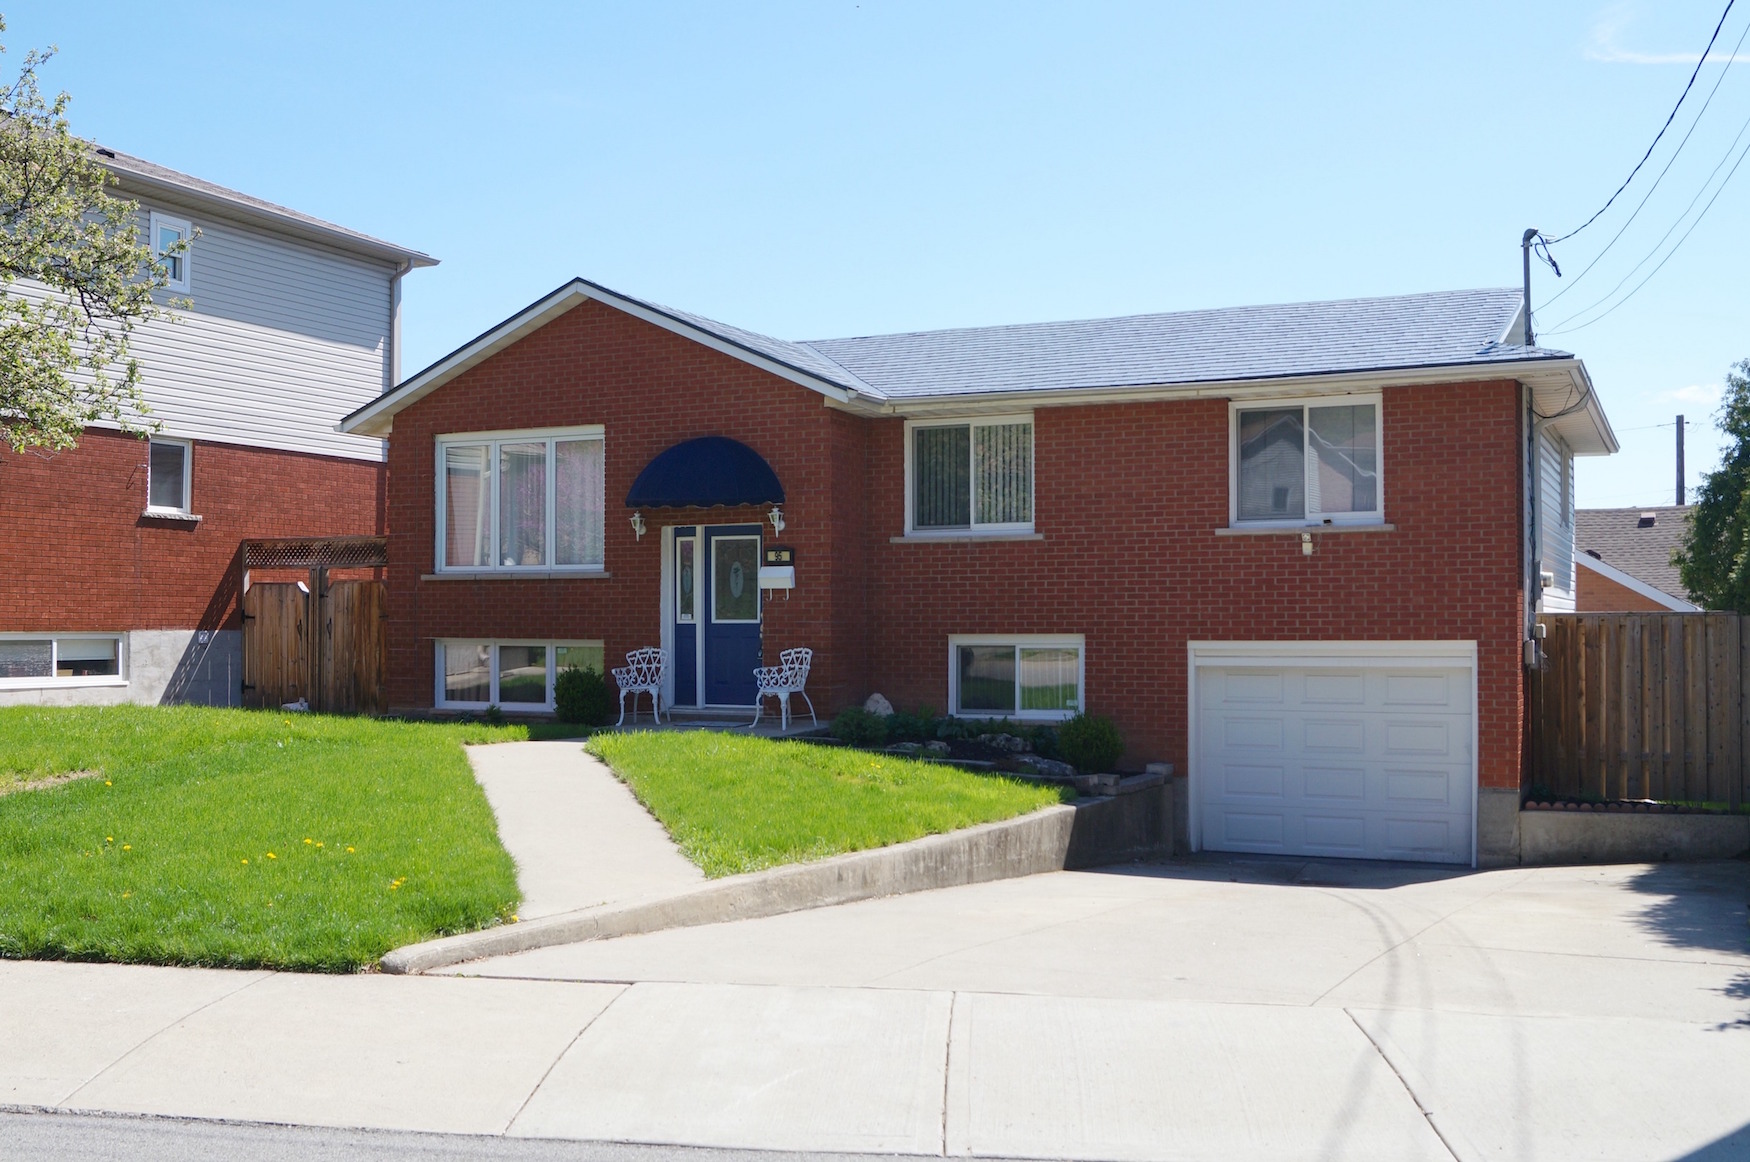 95-kimberly-drive-east-hamilton-house-home-for-sale-laura-doucette-sutton-realtor-agent